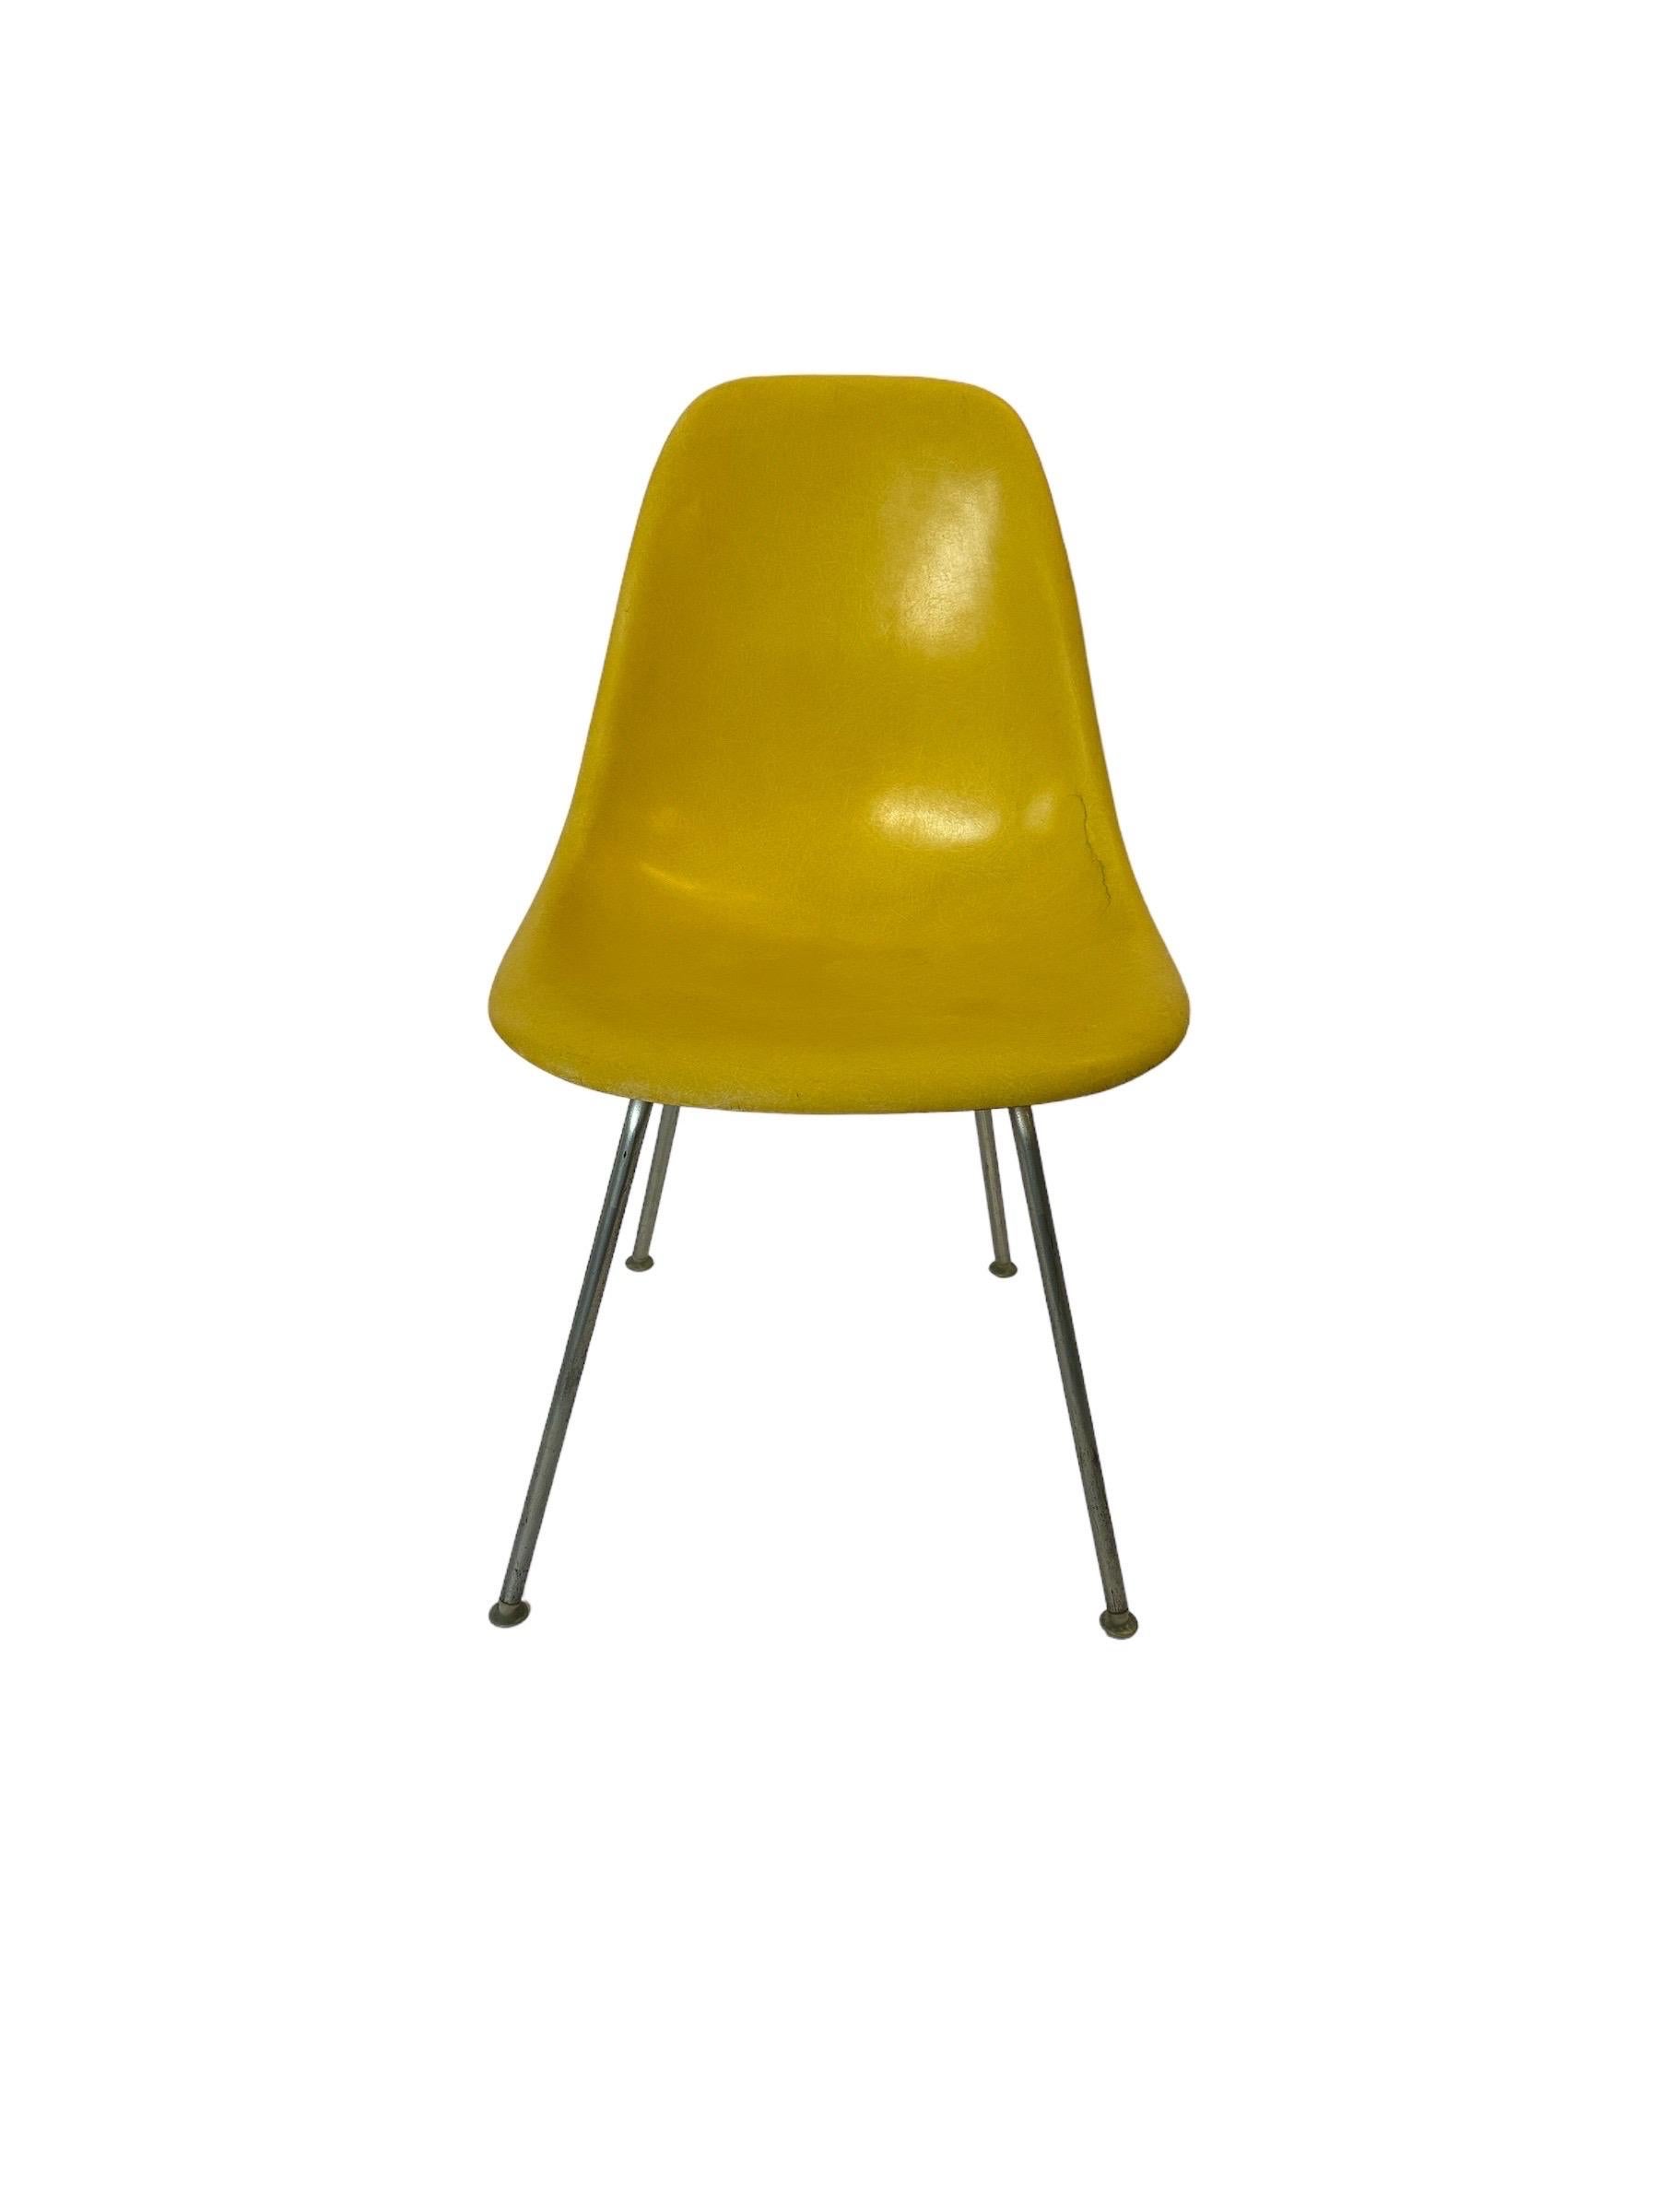 Mid-Century Modern Herman Miller Eames Fiberglass Dining Chair in Brilliant Yellow For Sale